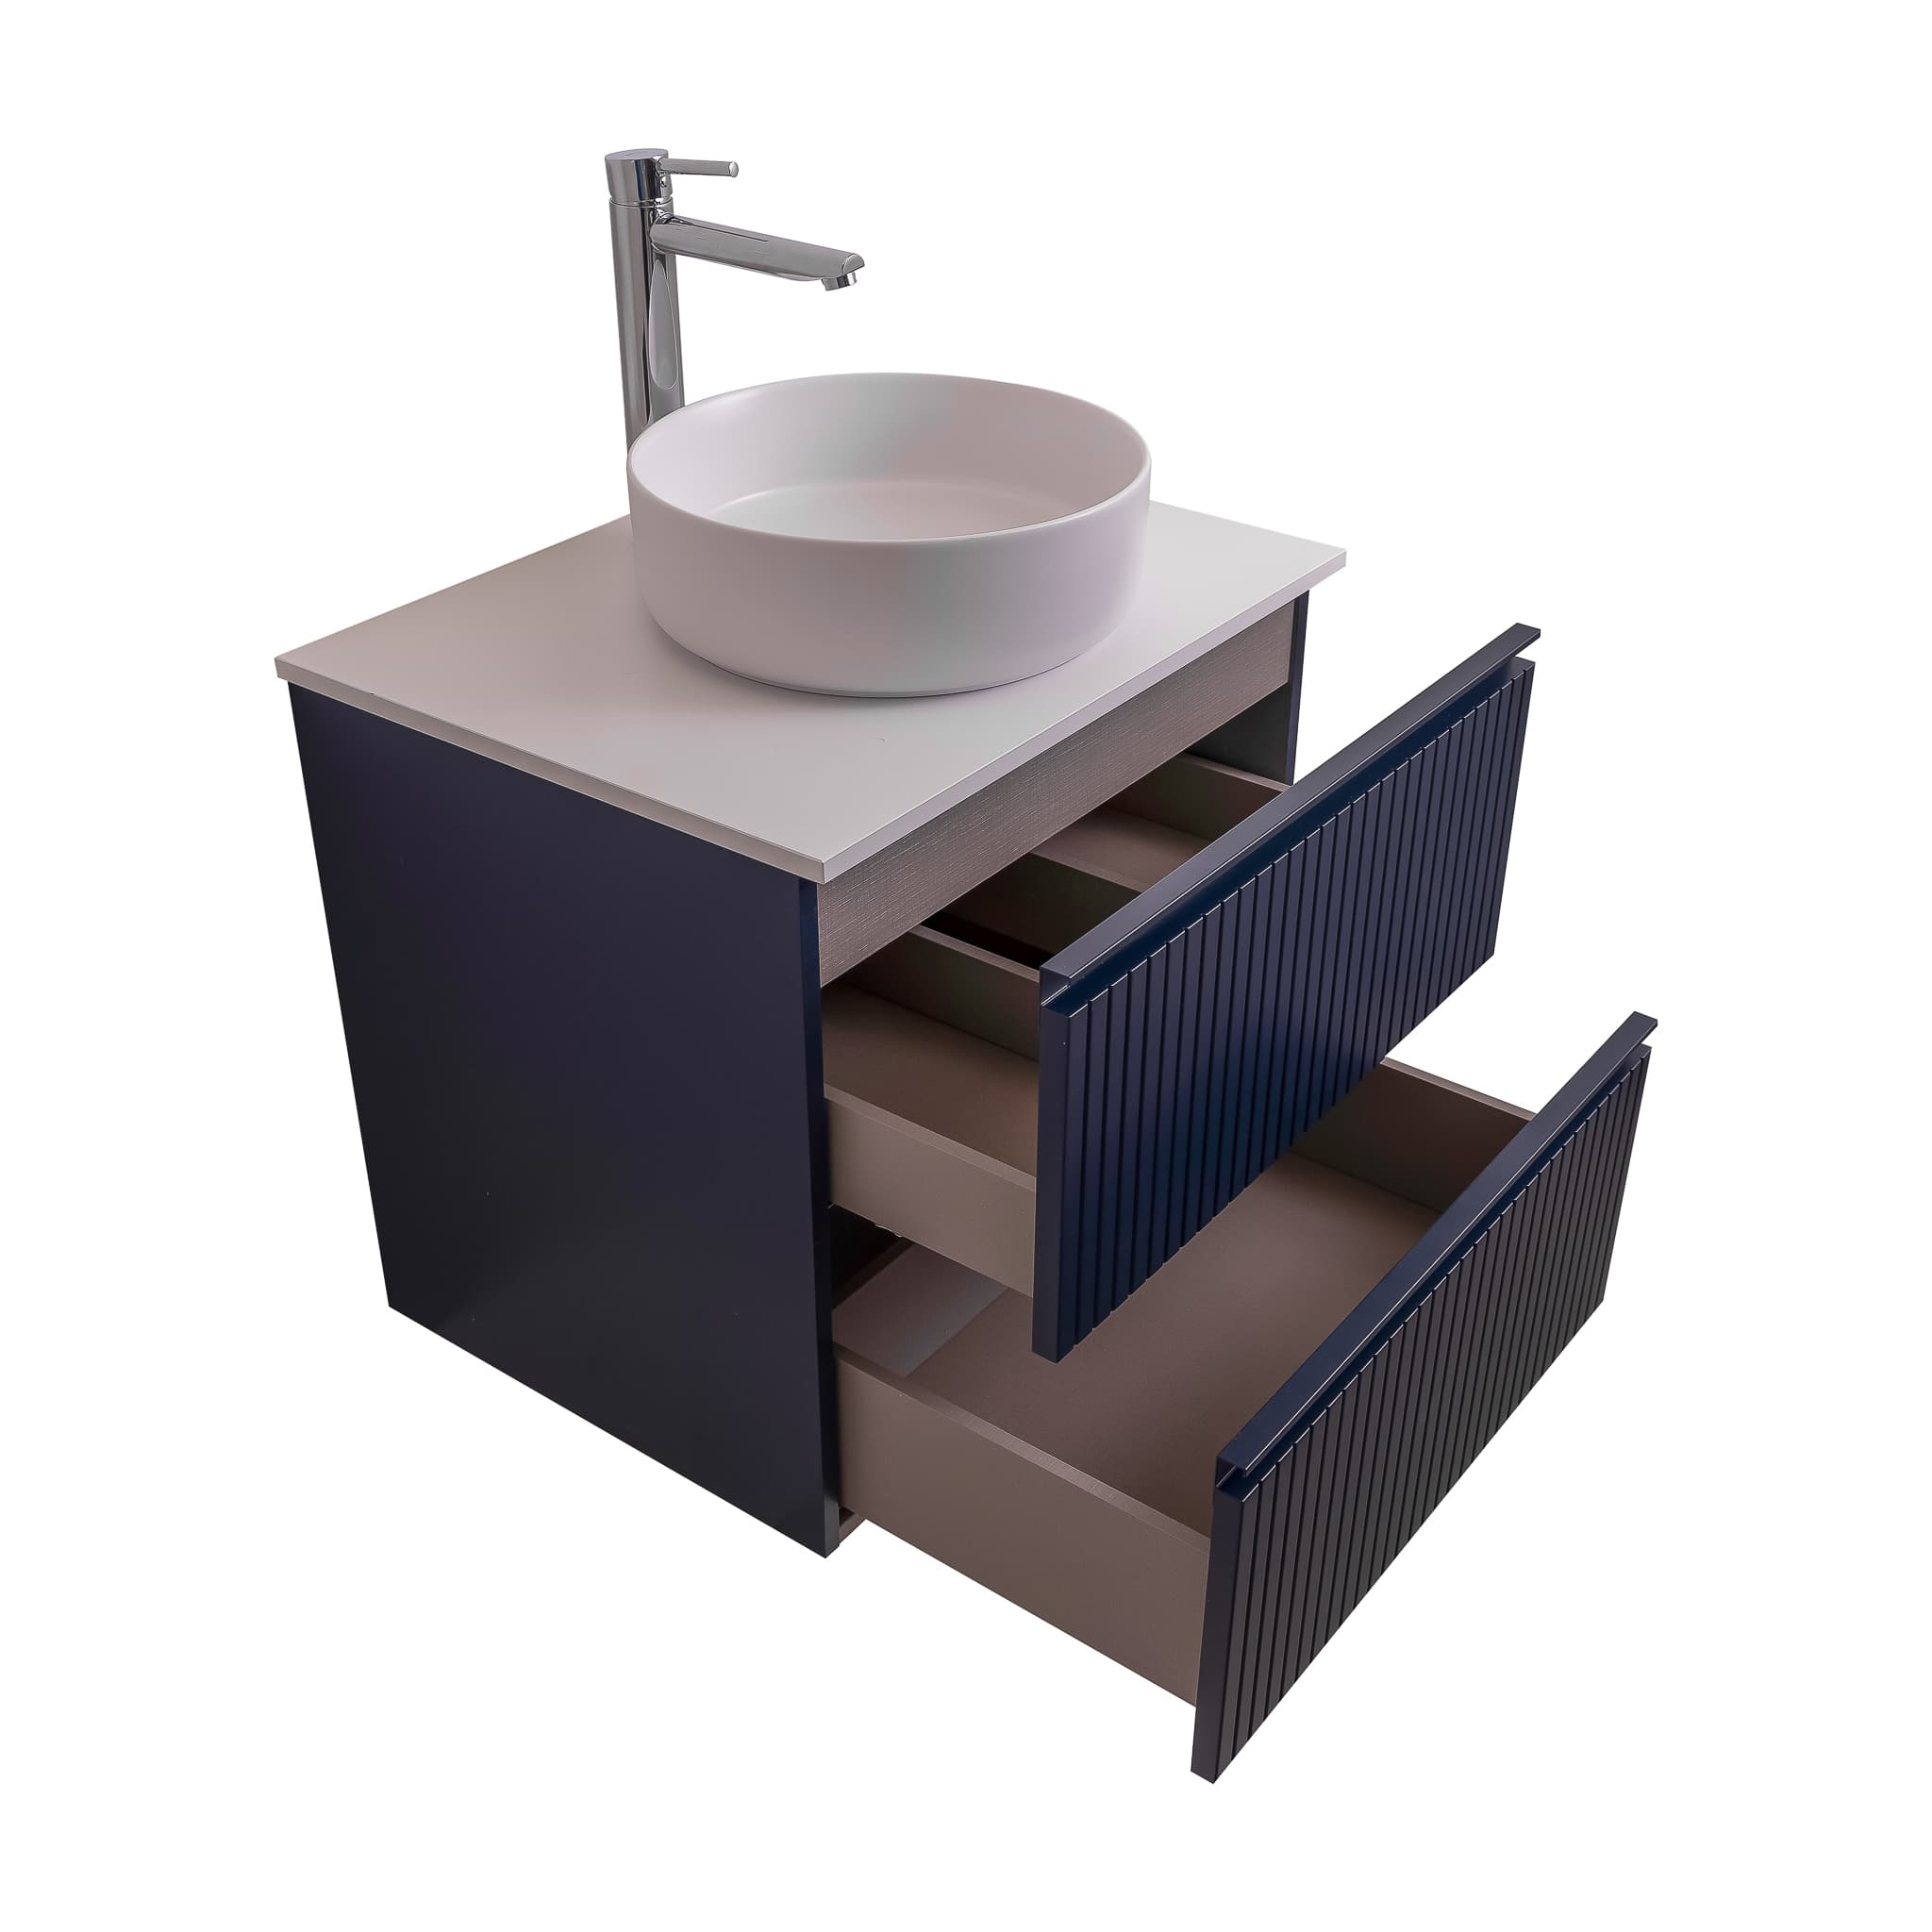 Ares 23.5 Matte Navy Blue Cabinet, Ares White Top And Ares White Ceramic Basin, Wall Mounted Modern Vanity Set